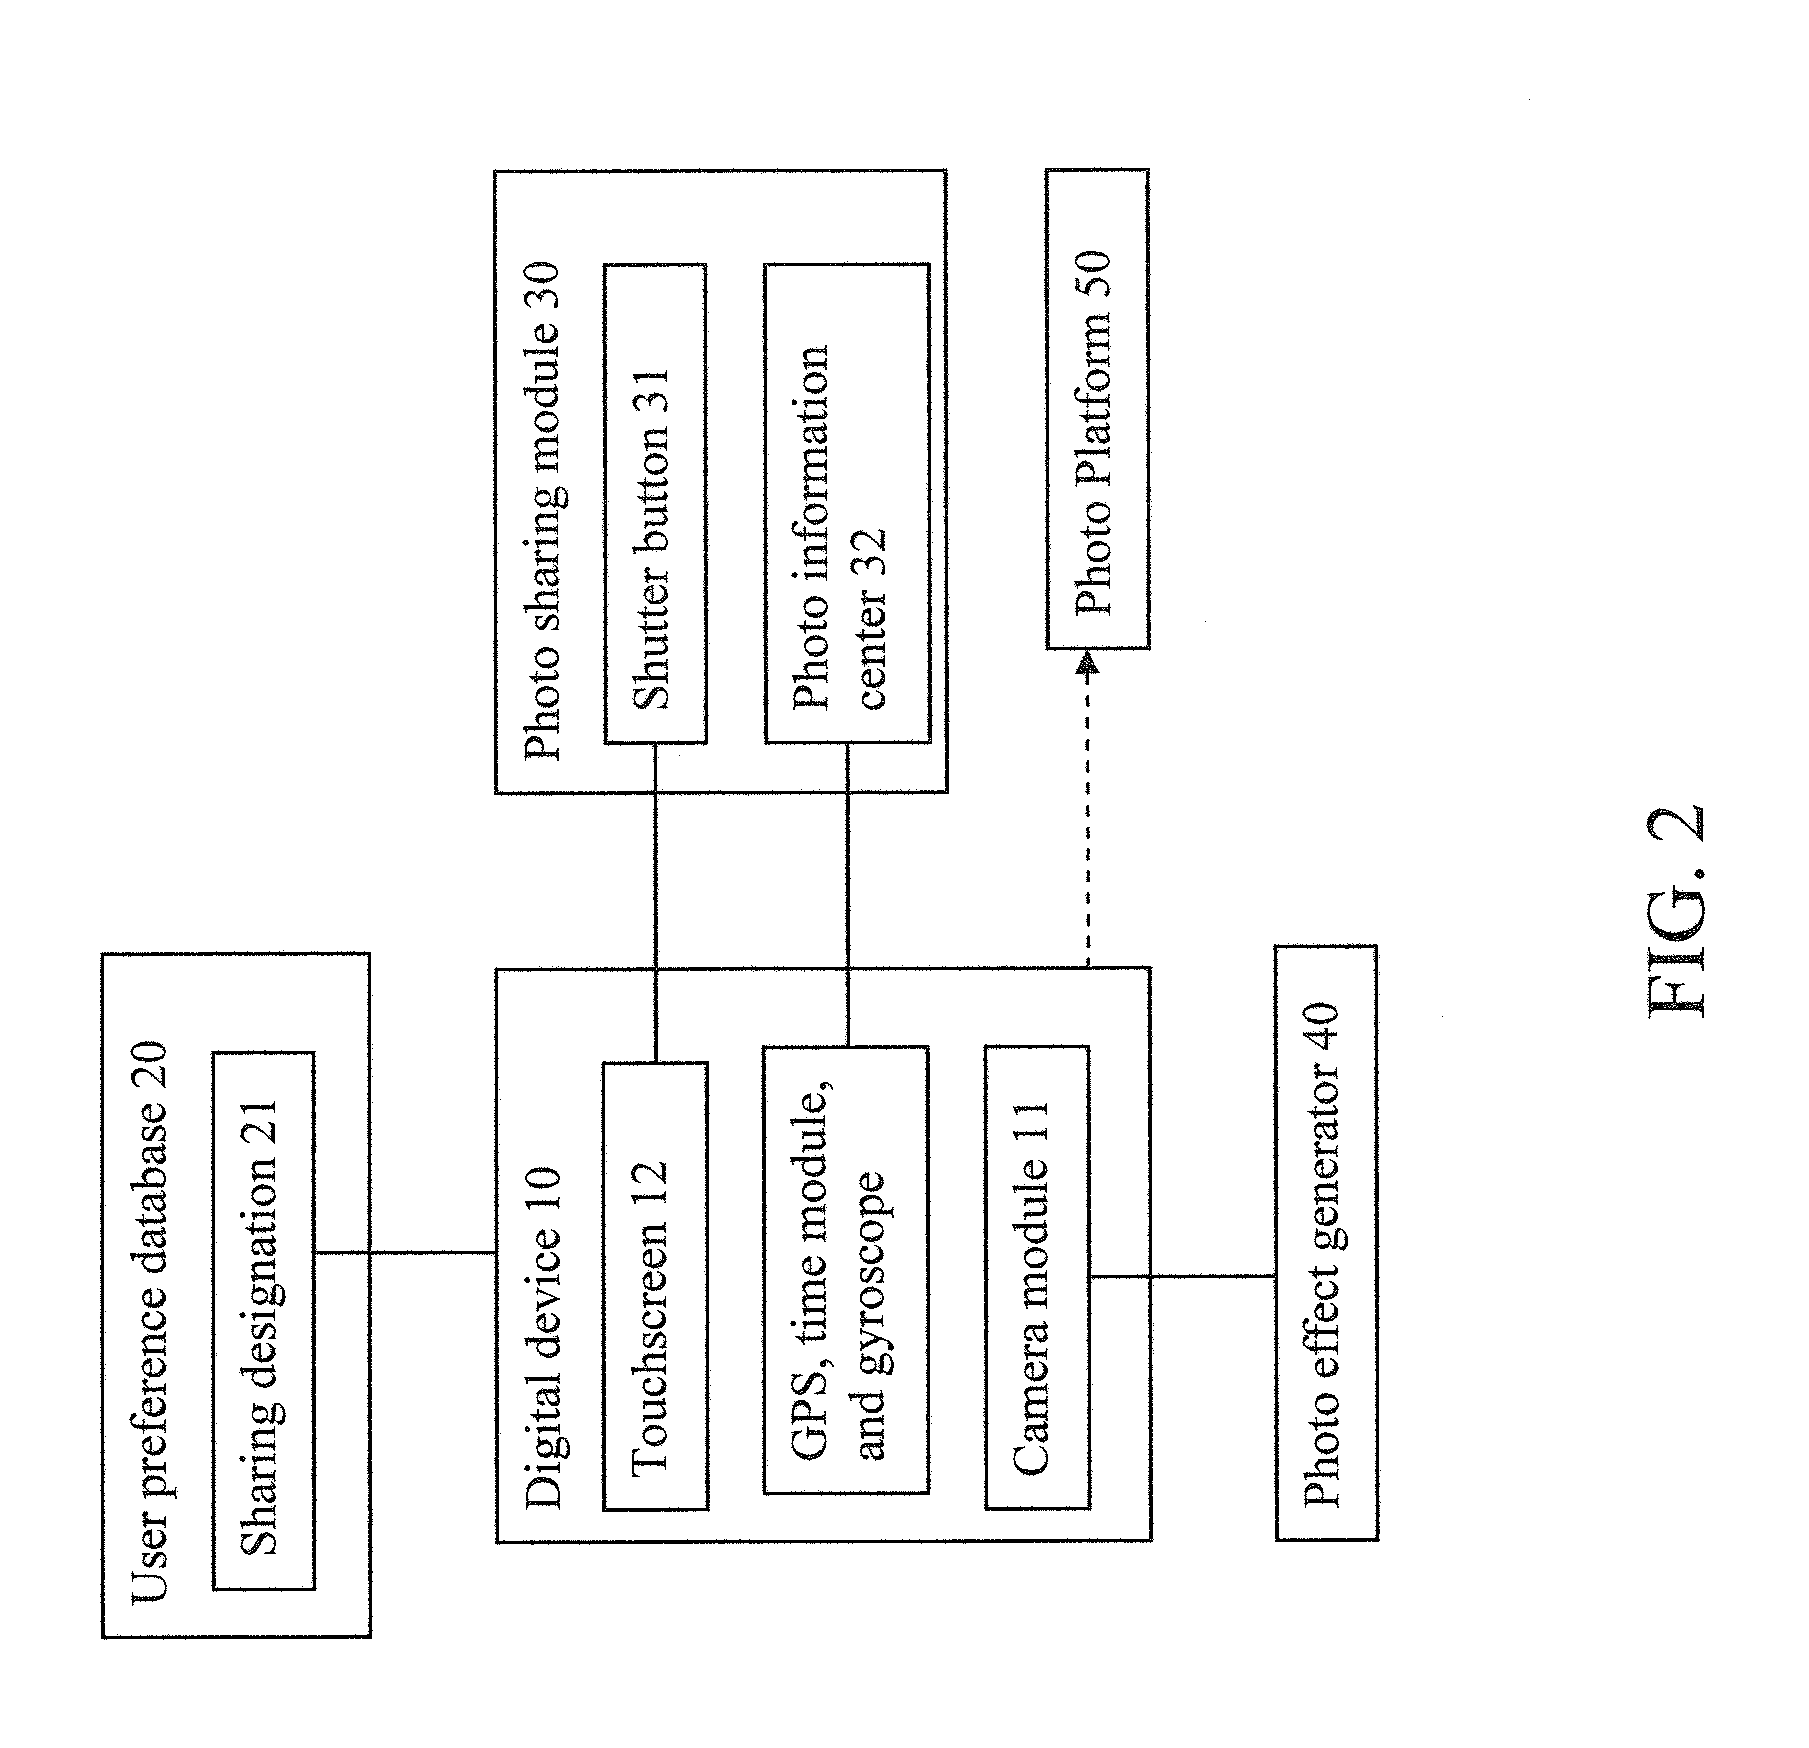 Instant Photo Sharing Arrangement and Method